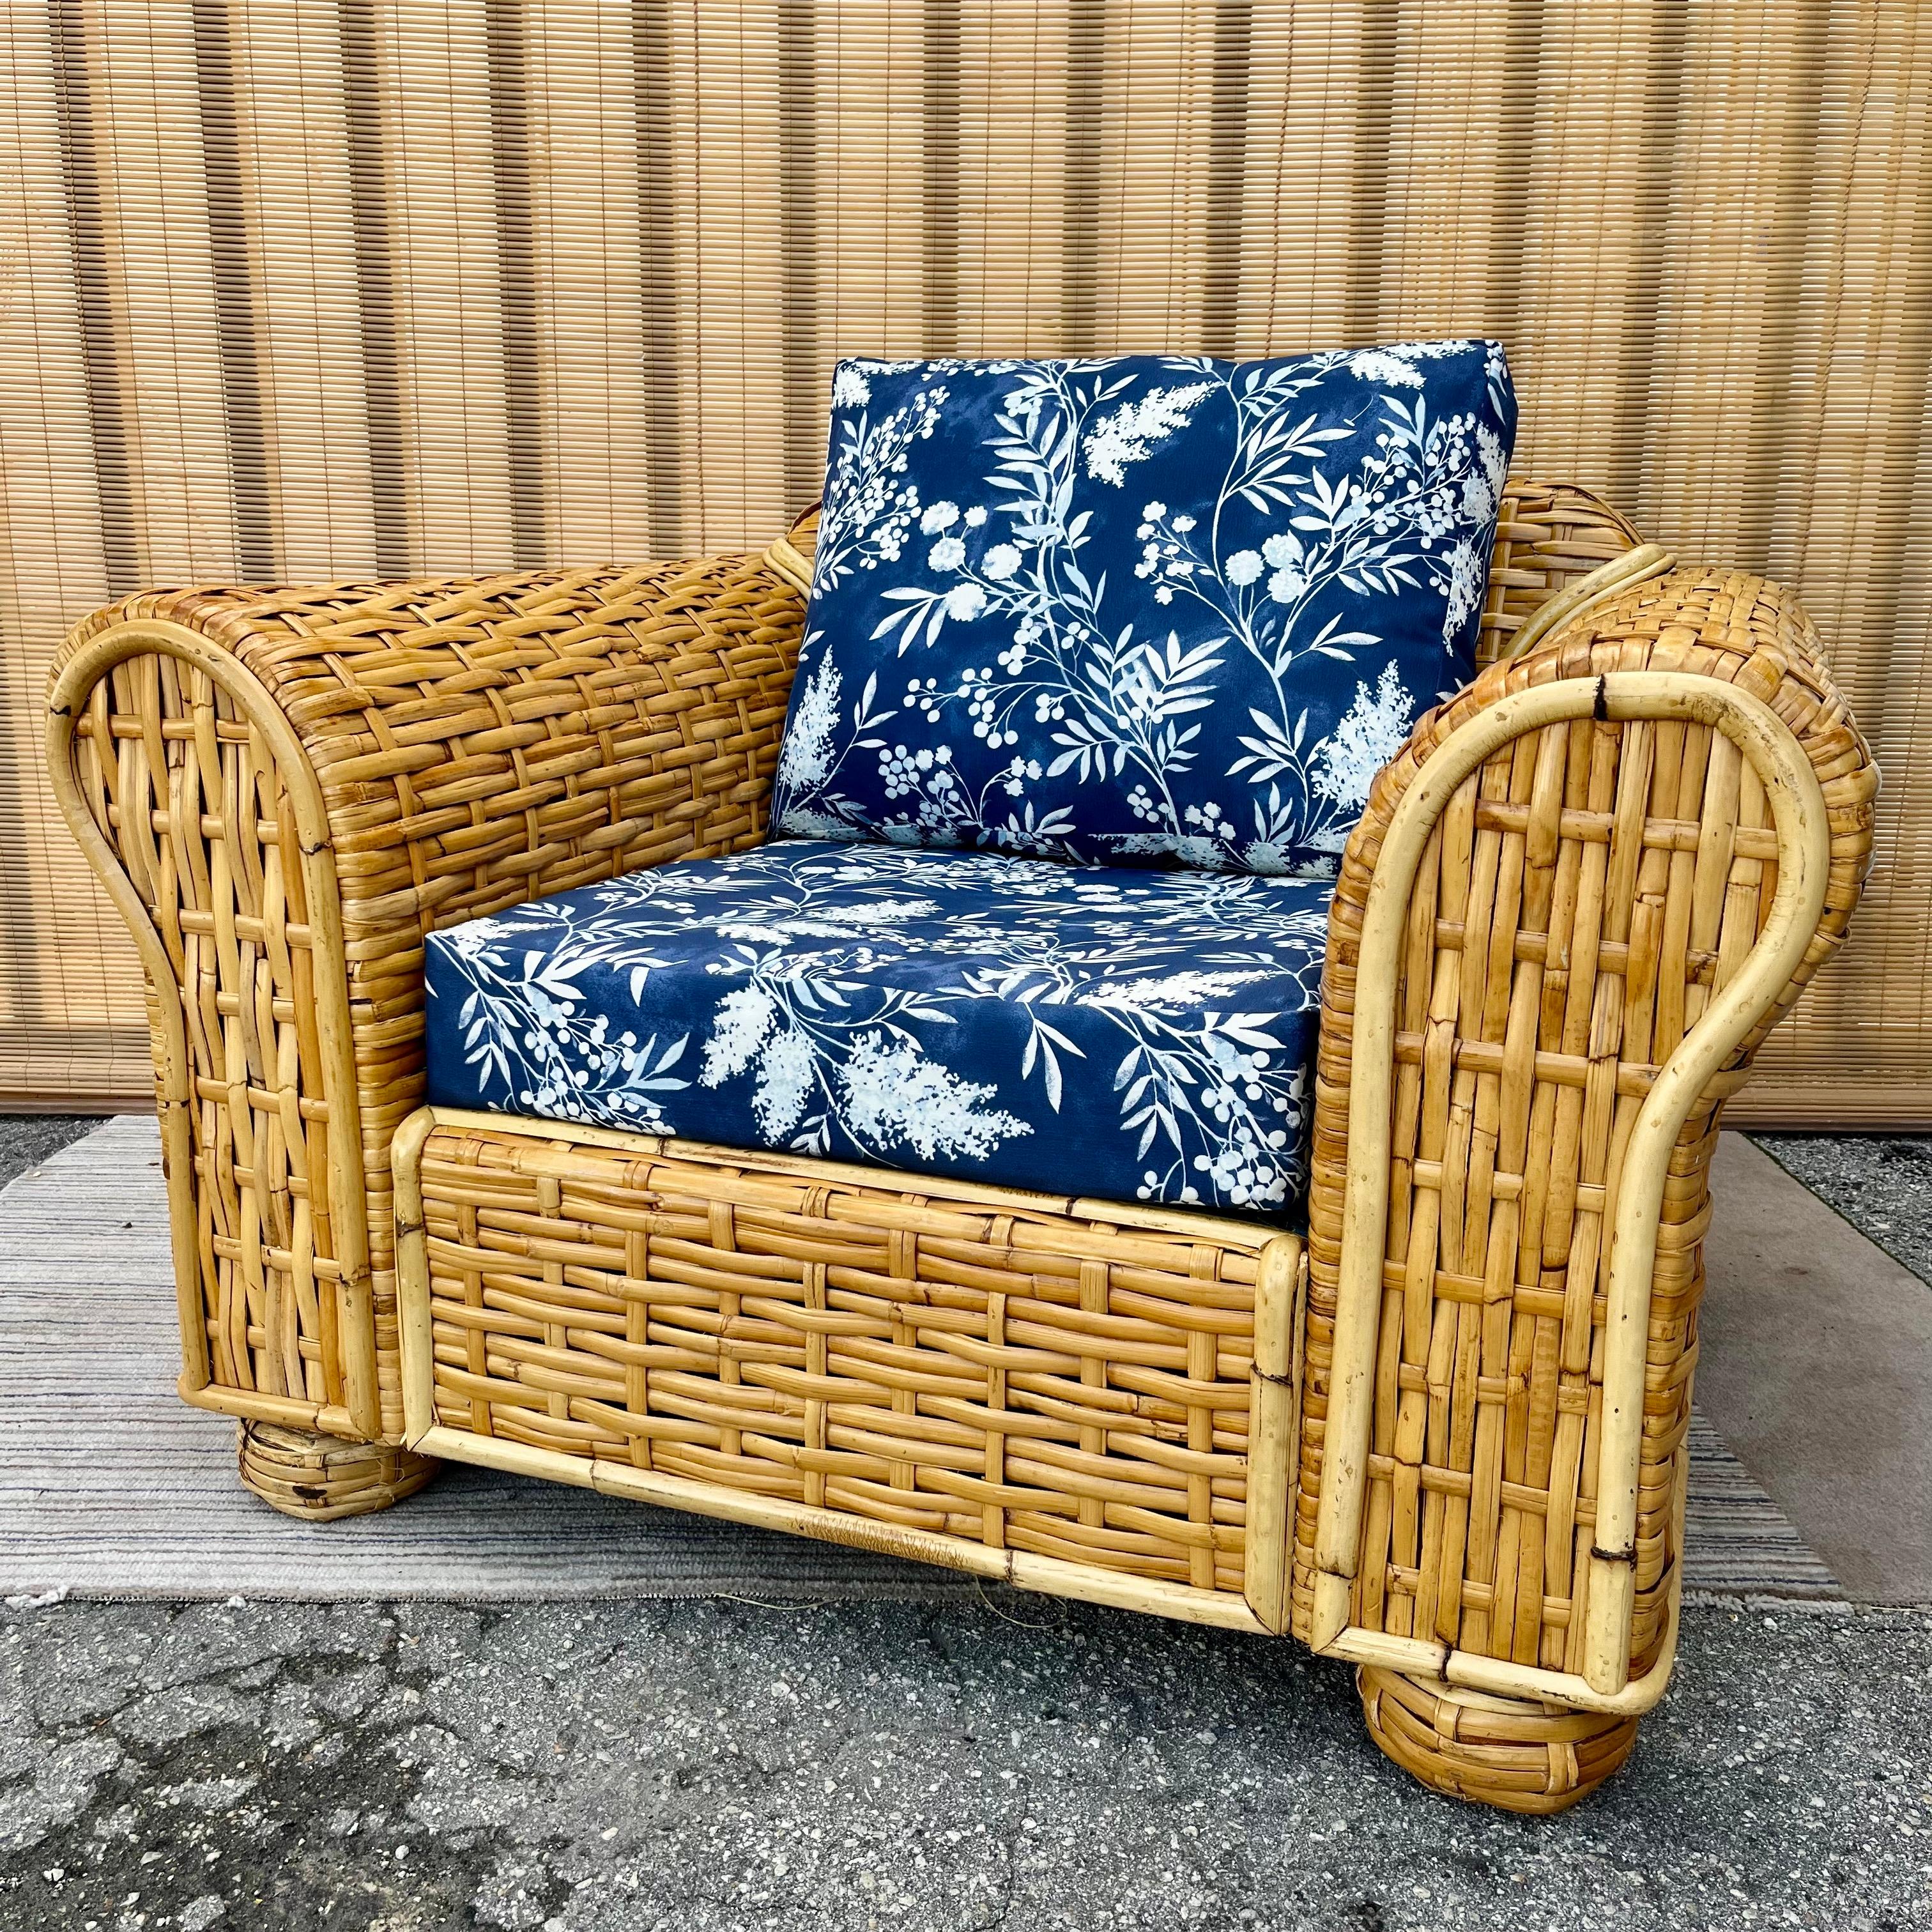 Vintage Late 20th Century Ralph Lauren Coastal Style Woven Rattan lounge chair. Circa 1980s.
Features a generous size woven rattan frame with rounded armrest and newly made removable cushion. 
The frame is in a very good original cosmetic and